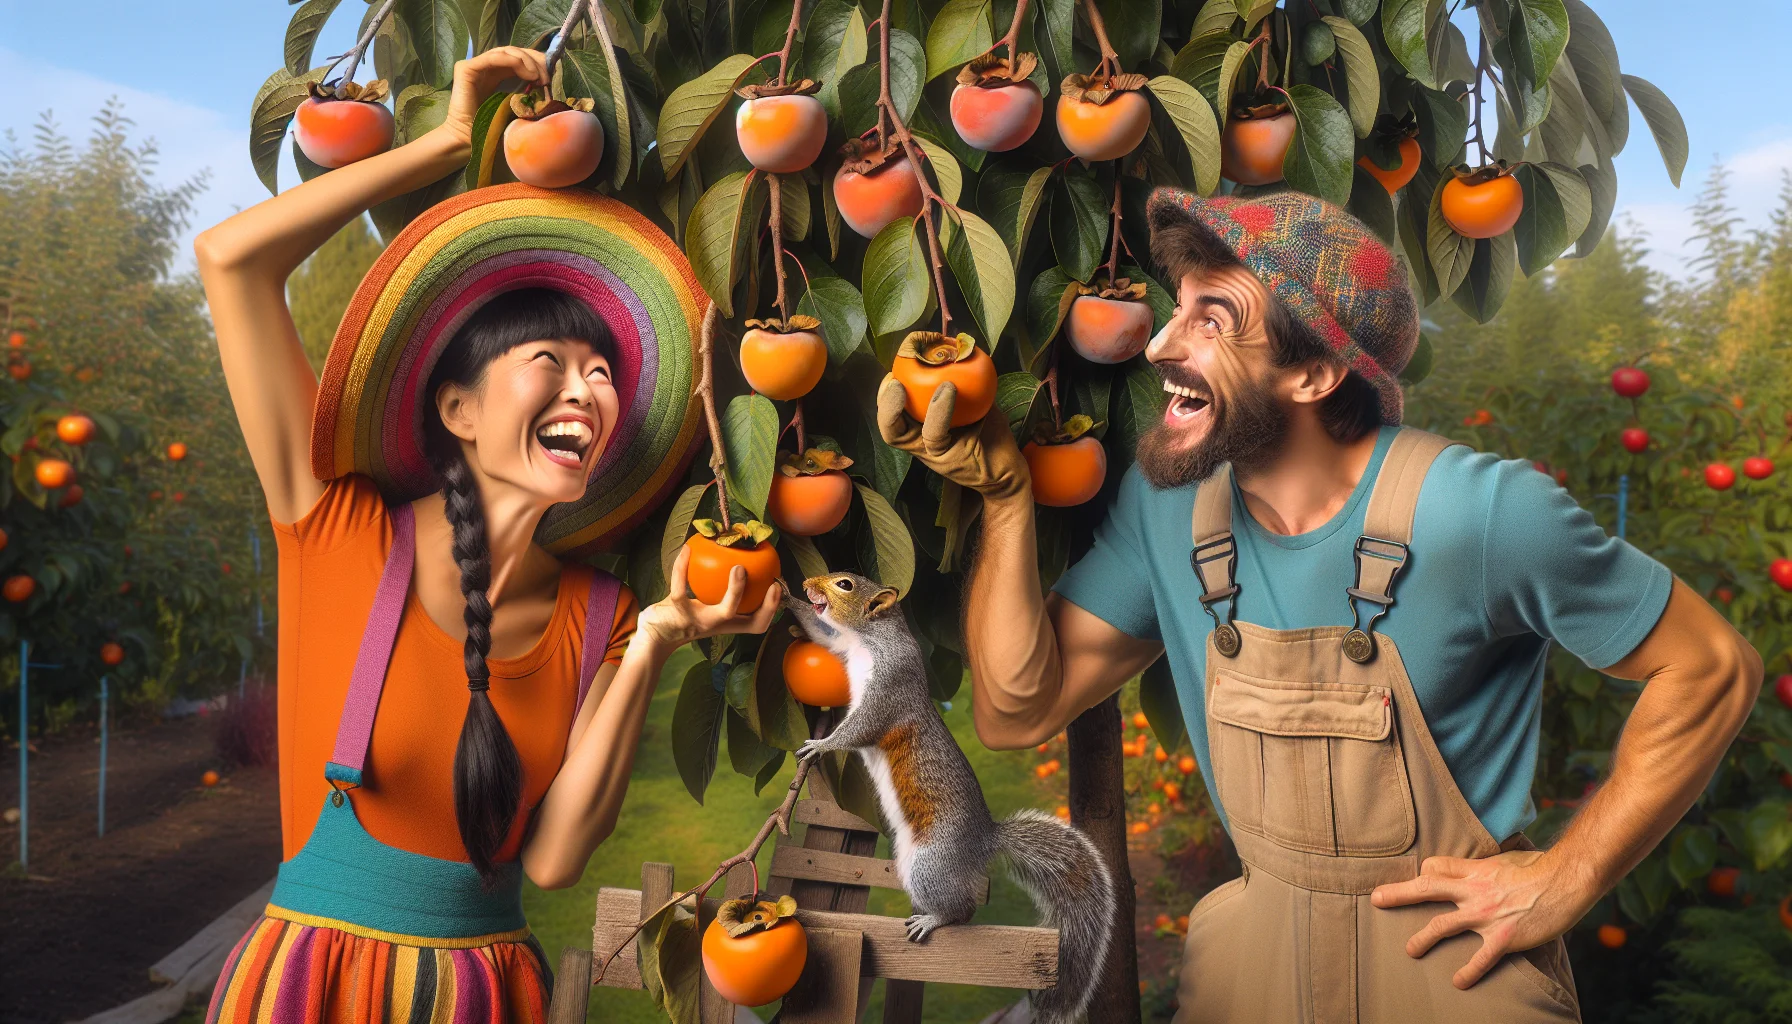 Visualize a humorously enticing scenario centered around ripe persimmons in a garden. Imagine a South Asian woman in her 30s and a Caucasian man in his 40s both laughing as they reach for the same ripe persimmon on a tree. Both are wearing quirky gardening attire – the woman with a brightly colored sunhat and the man in overalls. A sneaky squirrel is on the other side of the tree, tugging on another ripe persimmon. The vibrant colors of the garden and the ripe persimmons highlight the joy and excitement of gardening.